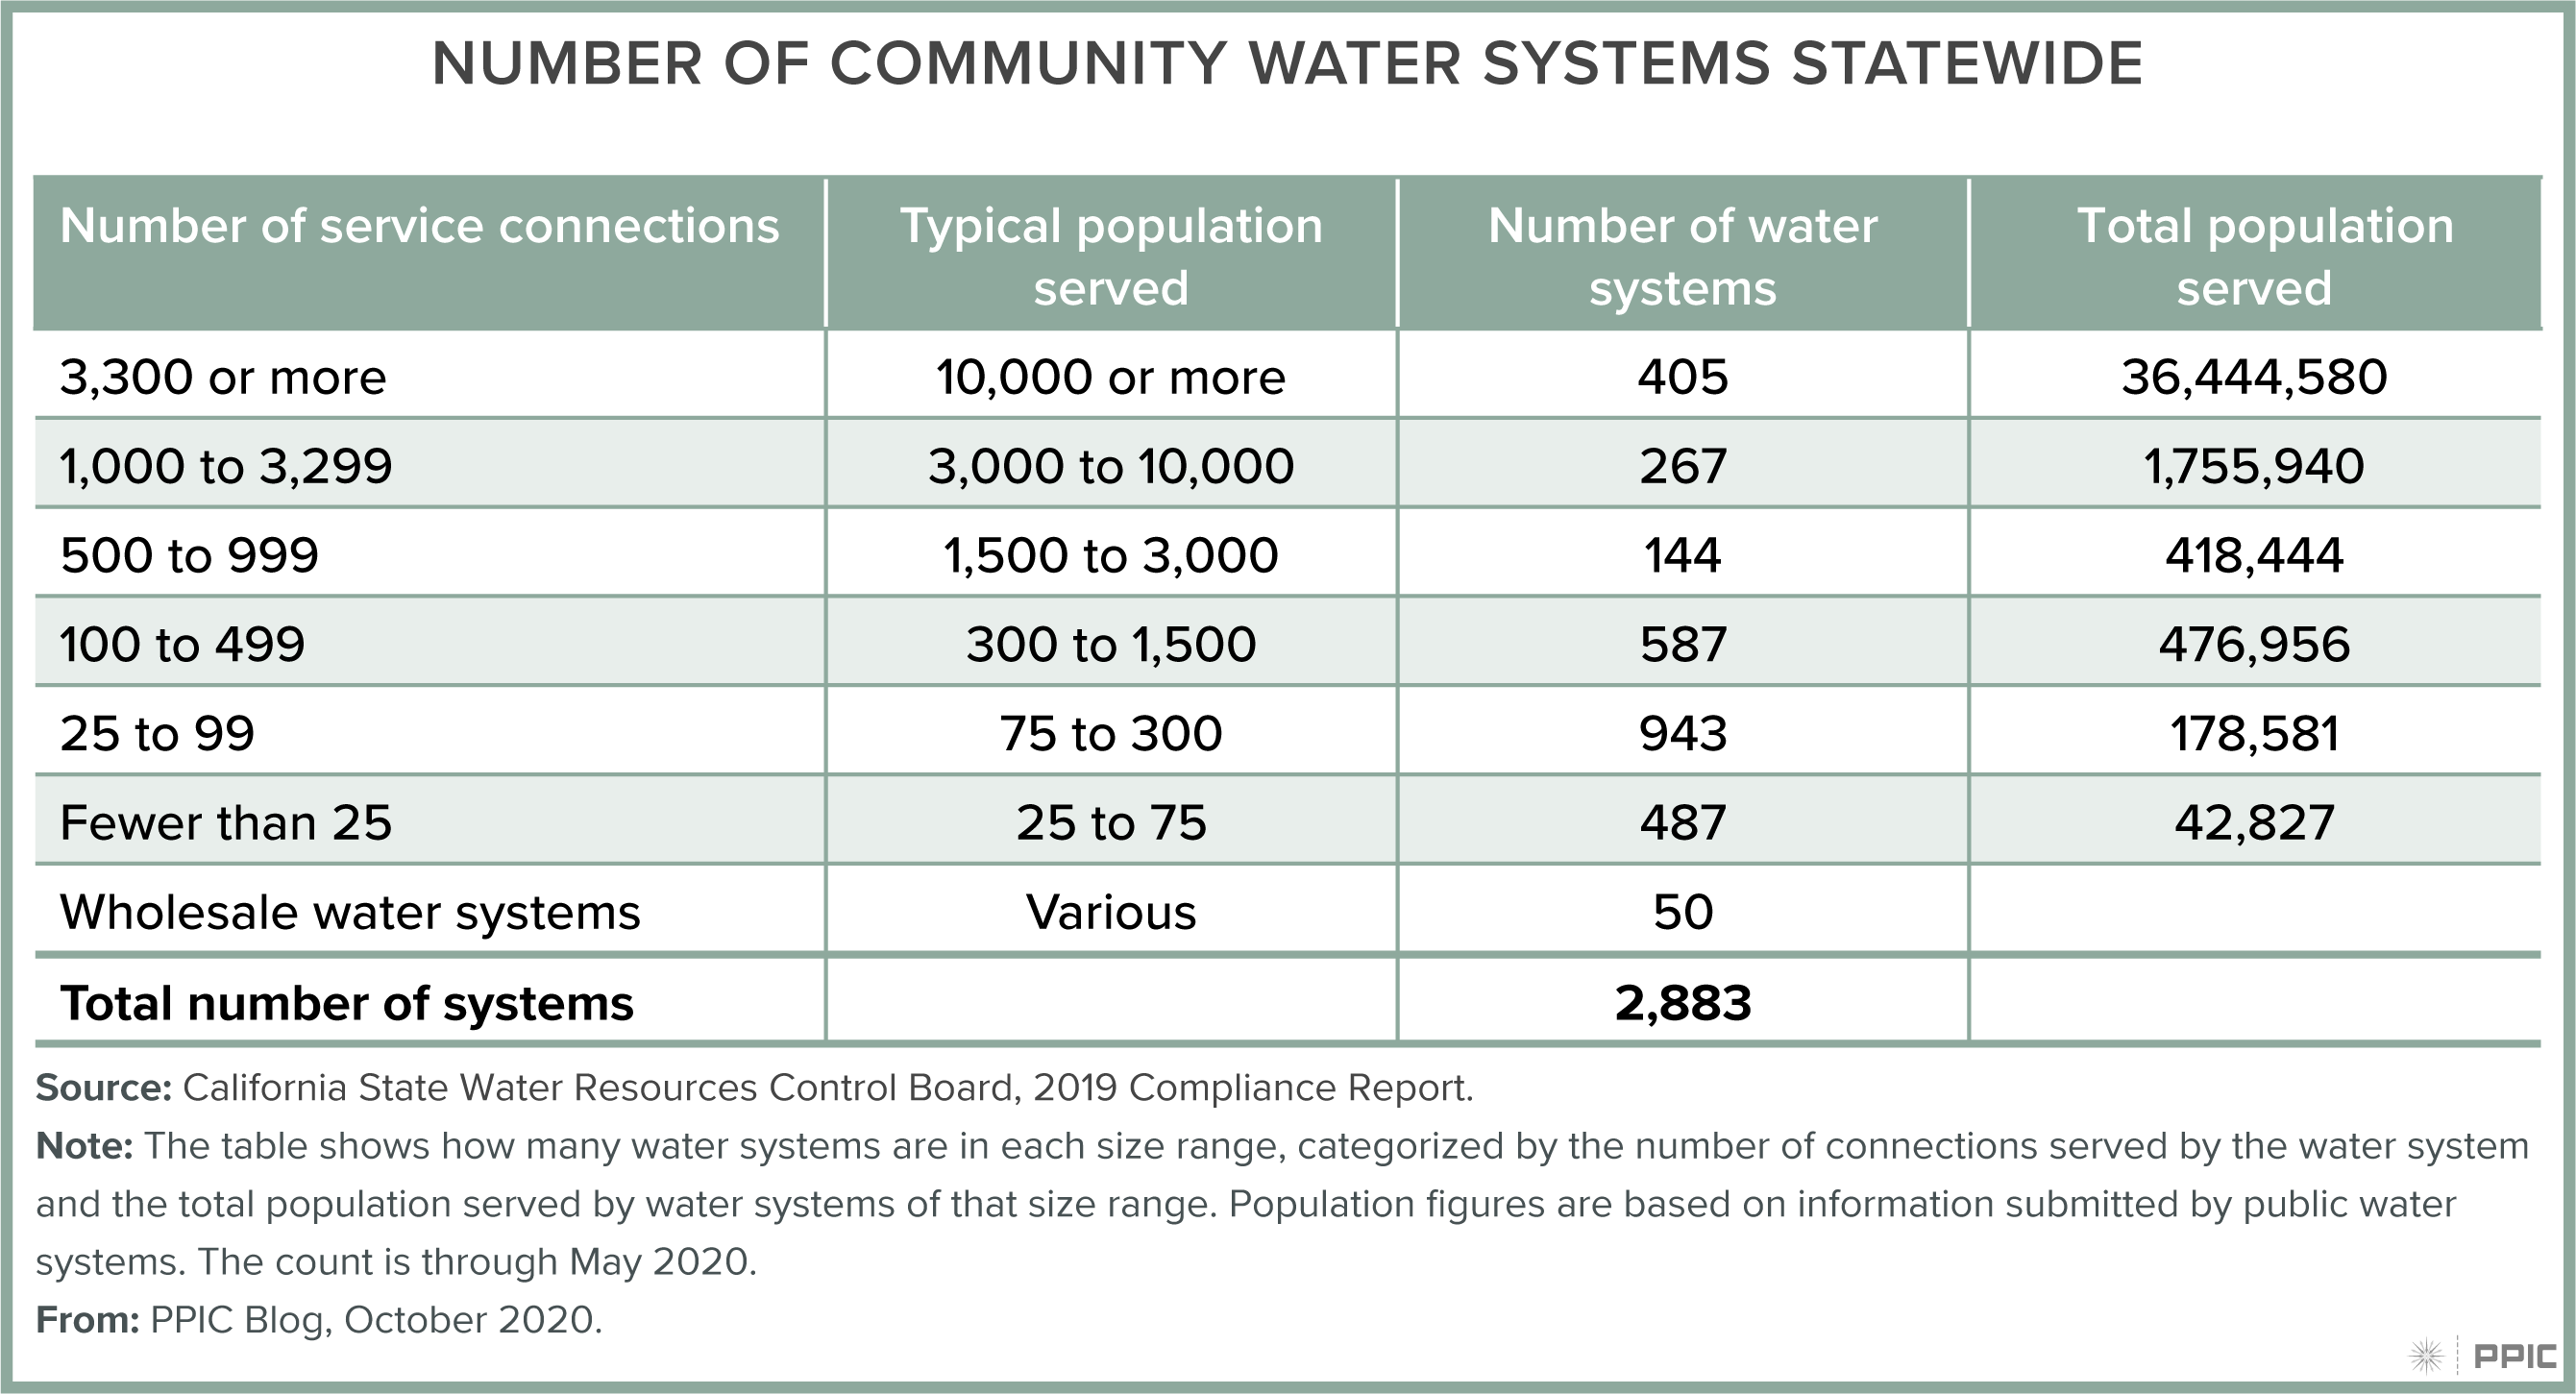 table - Most of California’s Community Drinking Water Systems Are Small